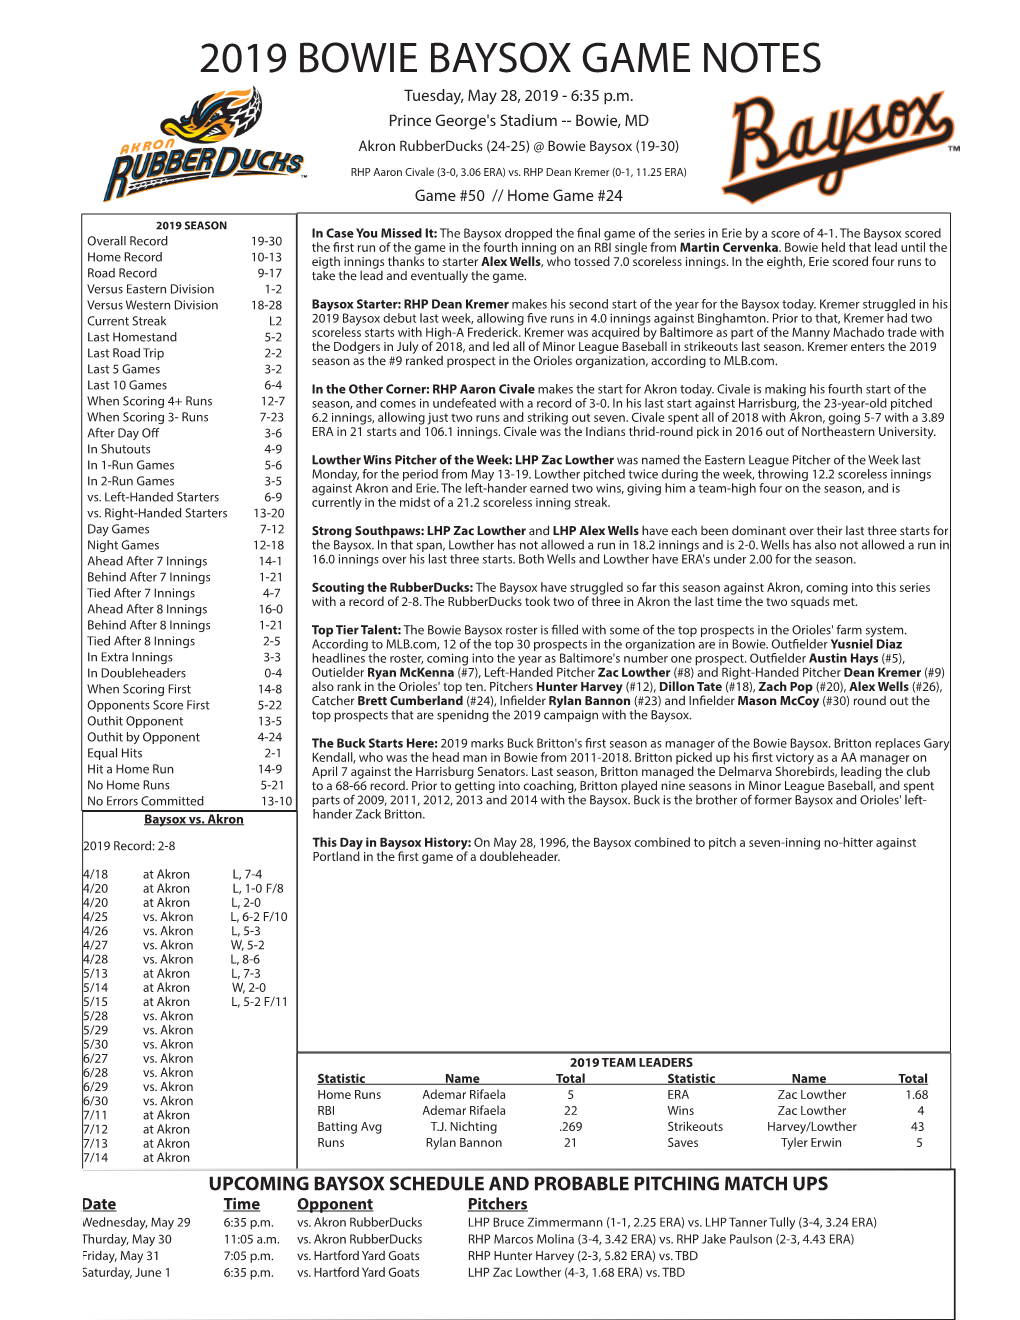 2019 BOWIE BAYSOX GAME NOTES Tuesday, May 28, 2019 - 6:35 P.M